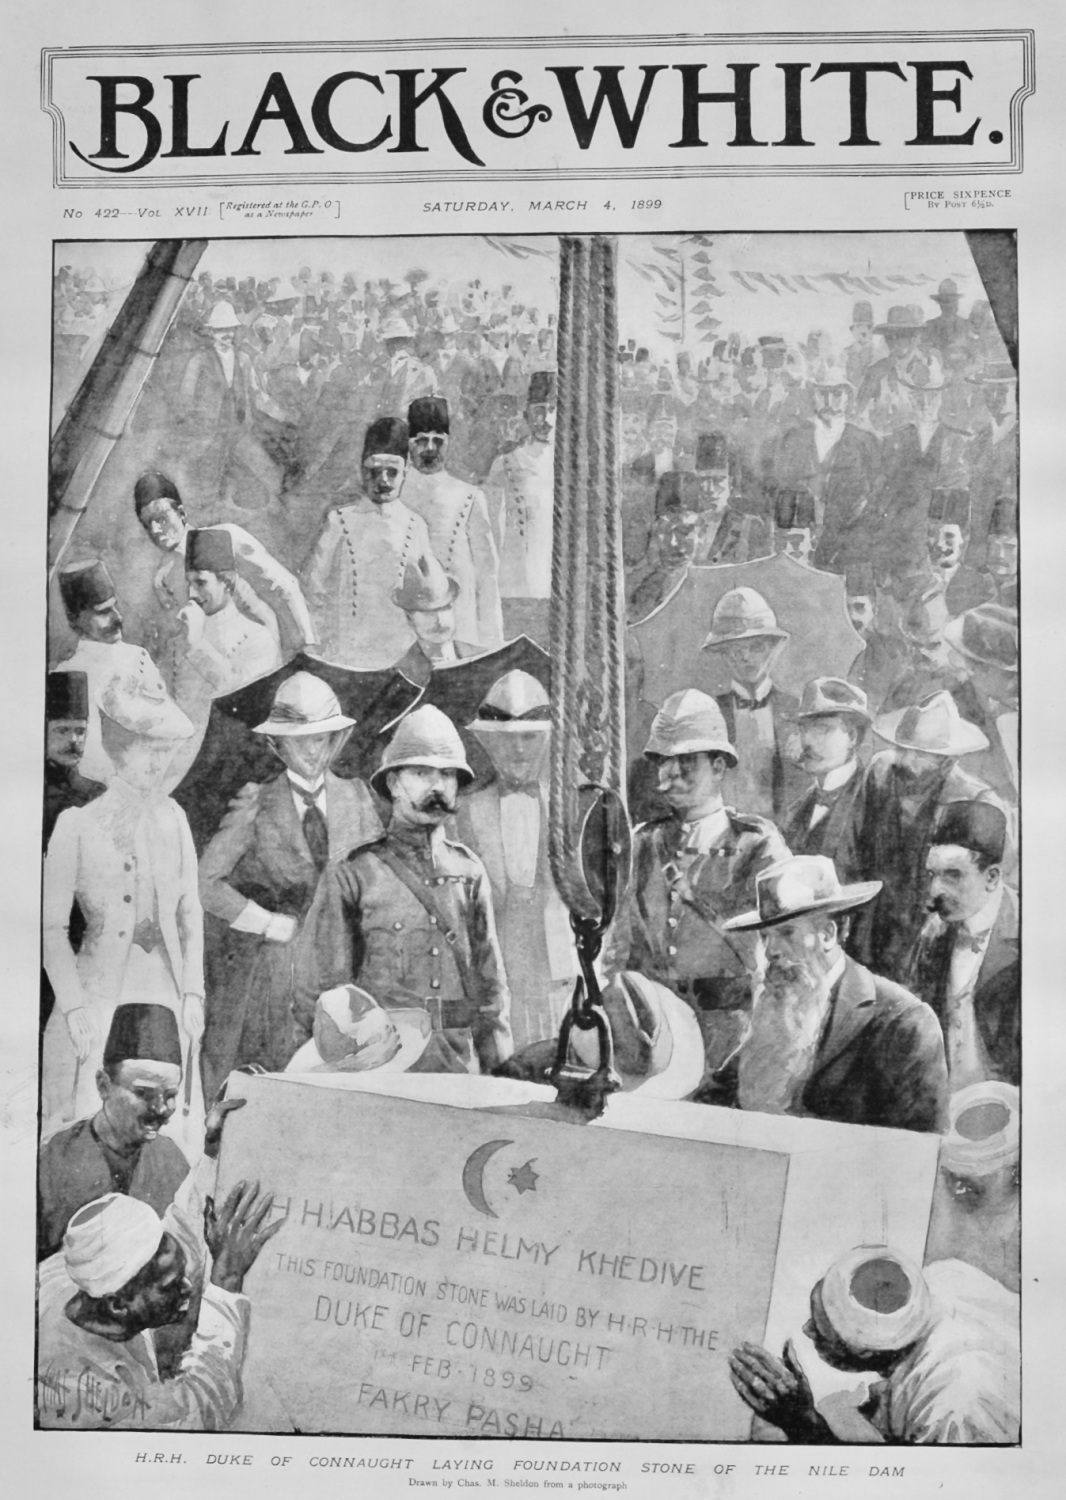 H.R.H. Duke of Connaught Laying Foundation Stone of the Nile Dam.  1899.